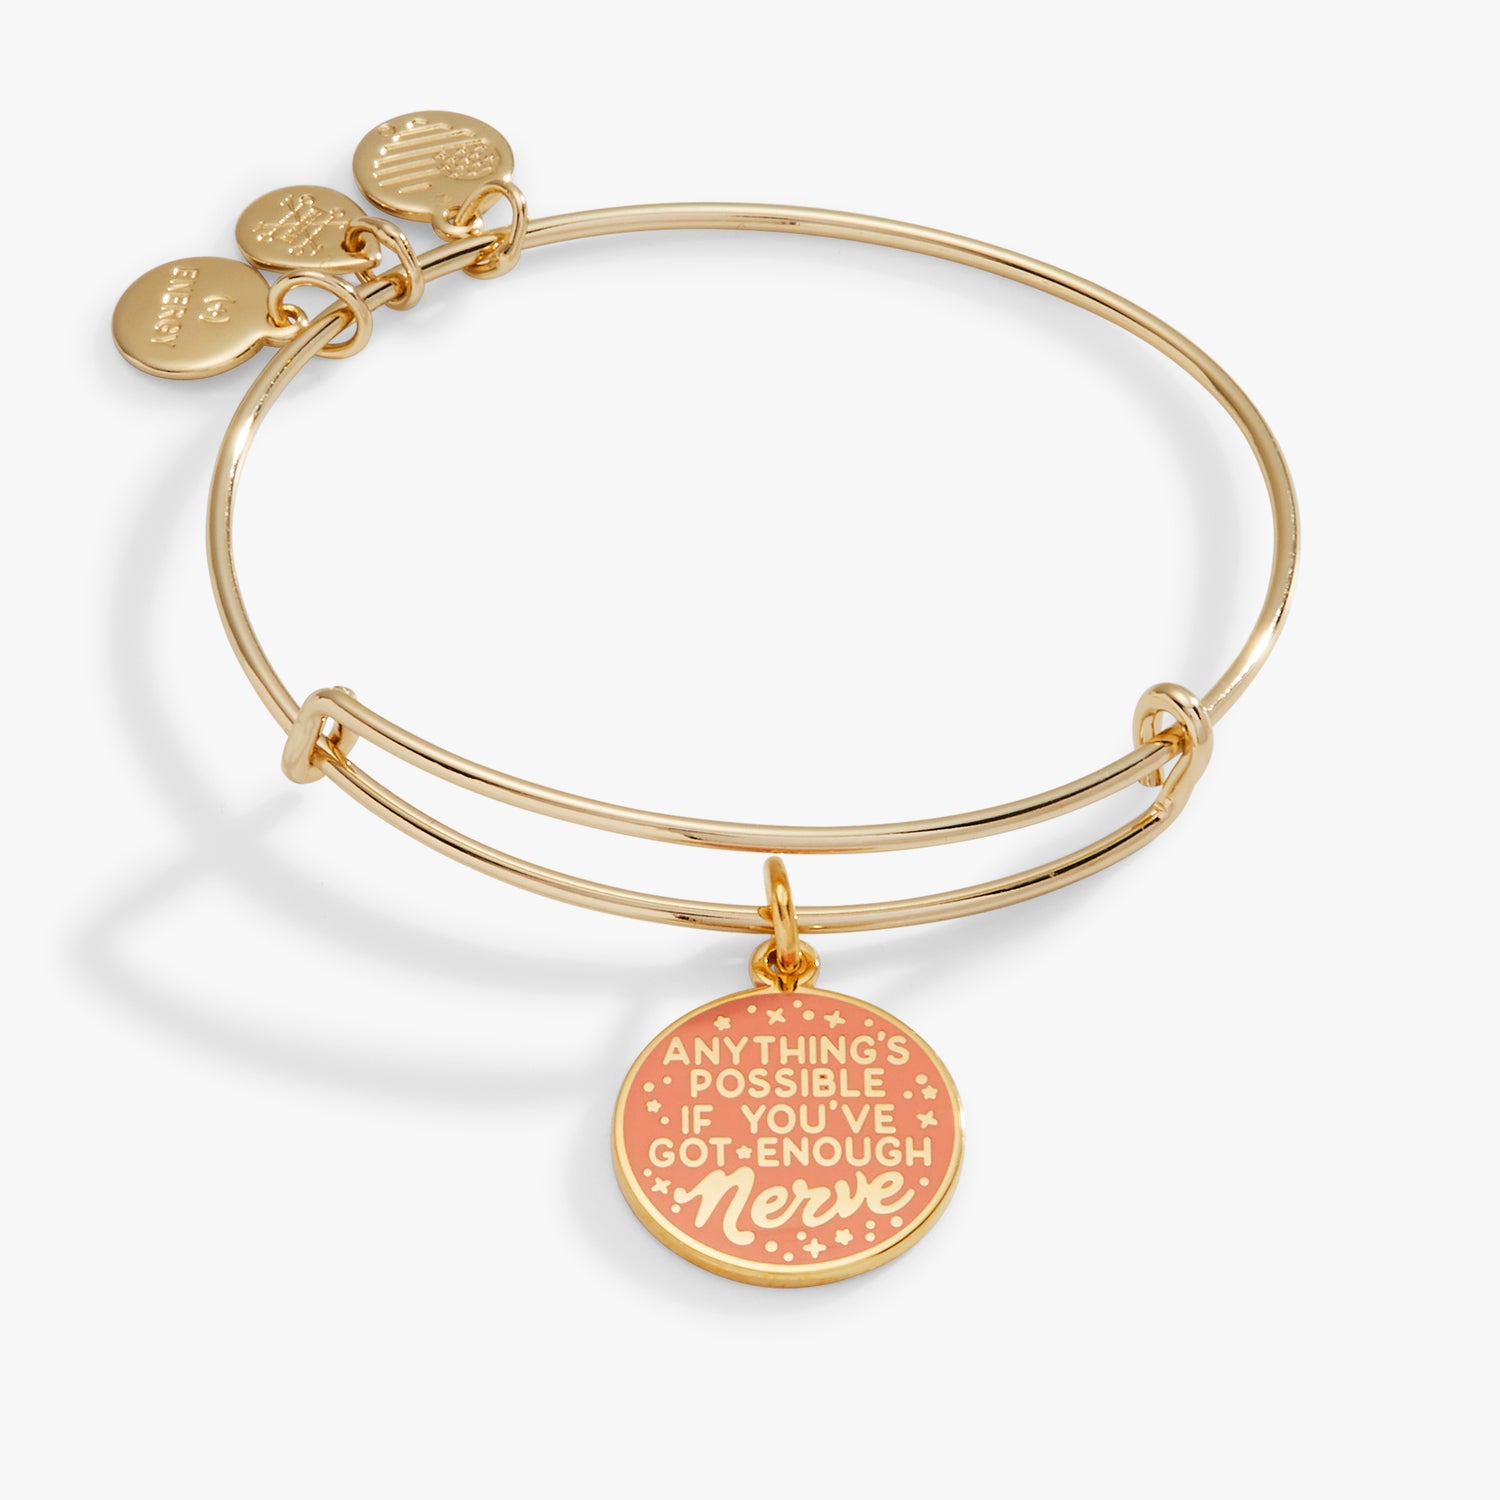 HARRY POTTER™ Ginny 'Anything's Possible If You've Got Enough Nerve' Charm Bangle